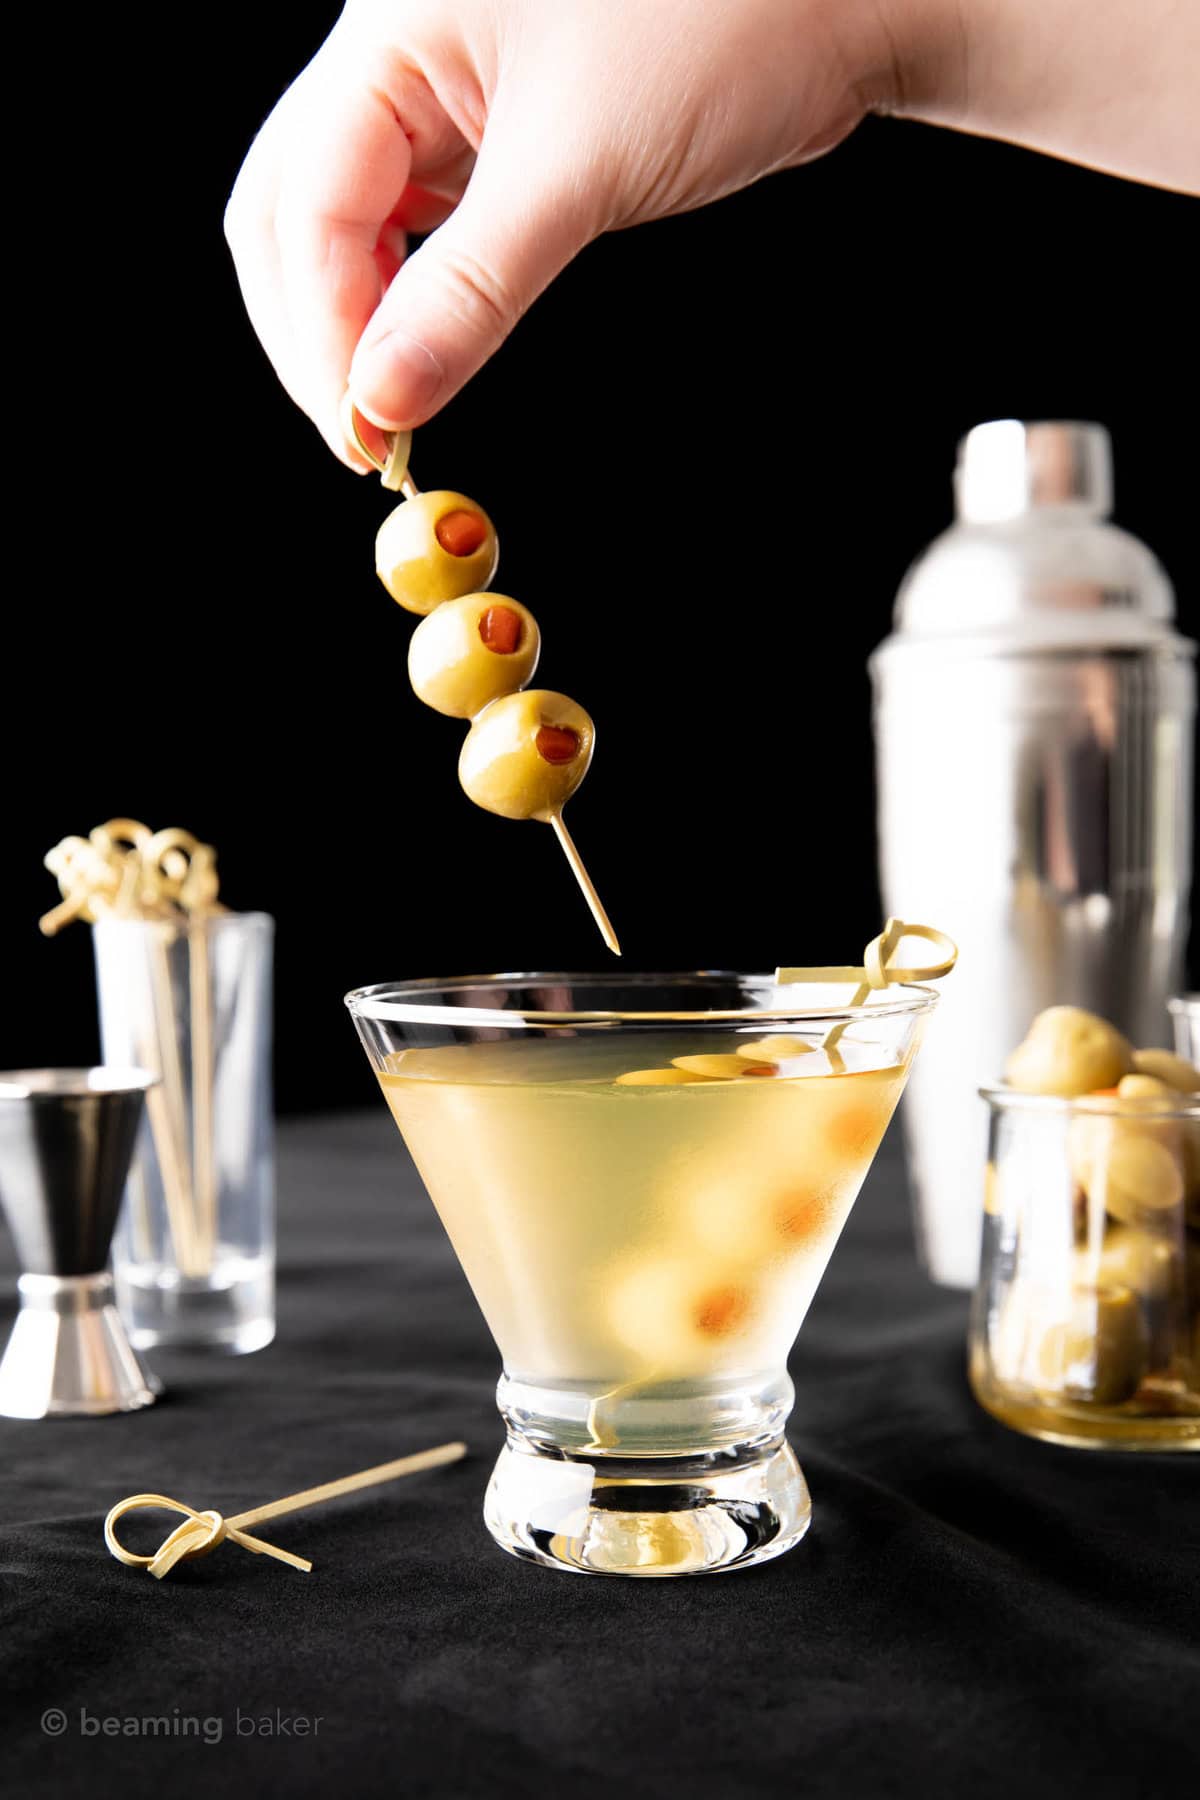 Hand holding a second olive skewer to complete the extra dirty martini against a black backdrop